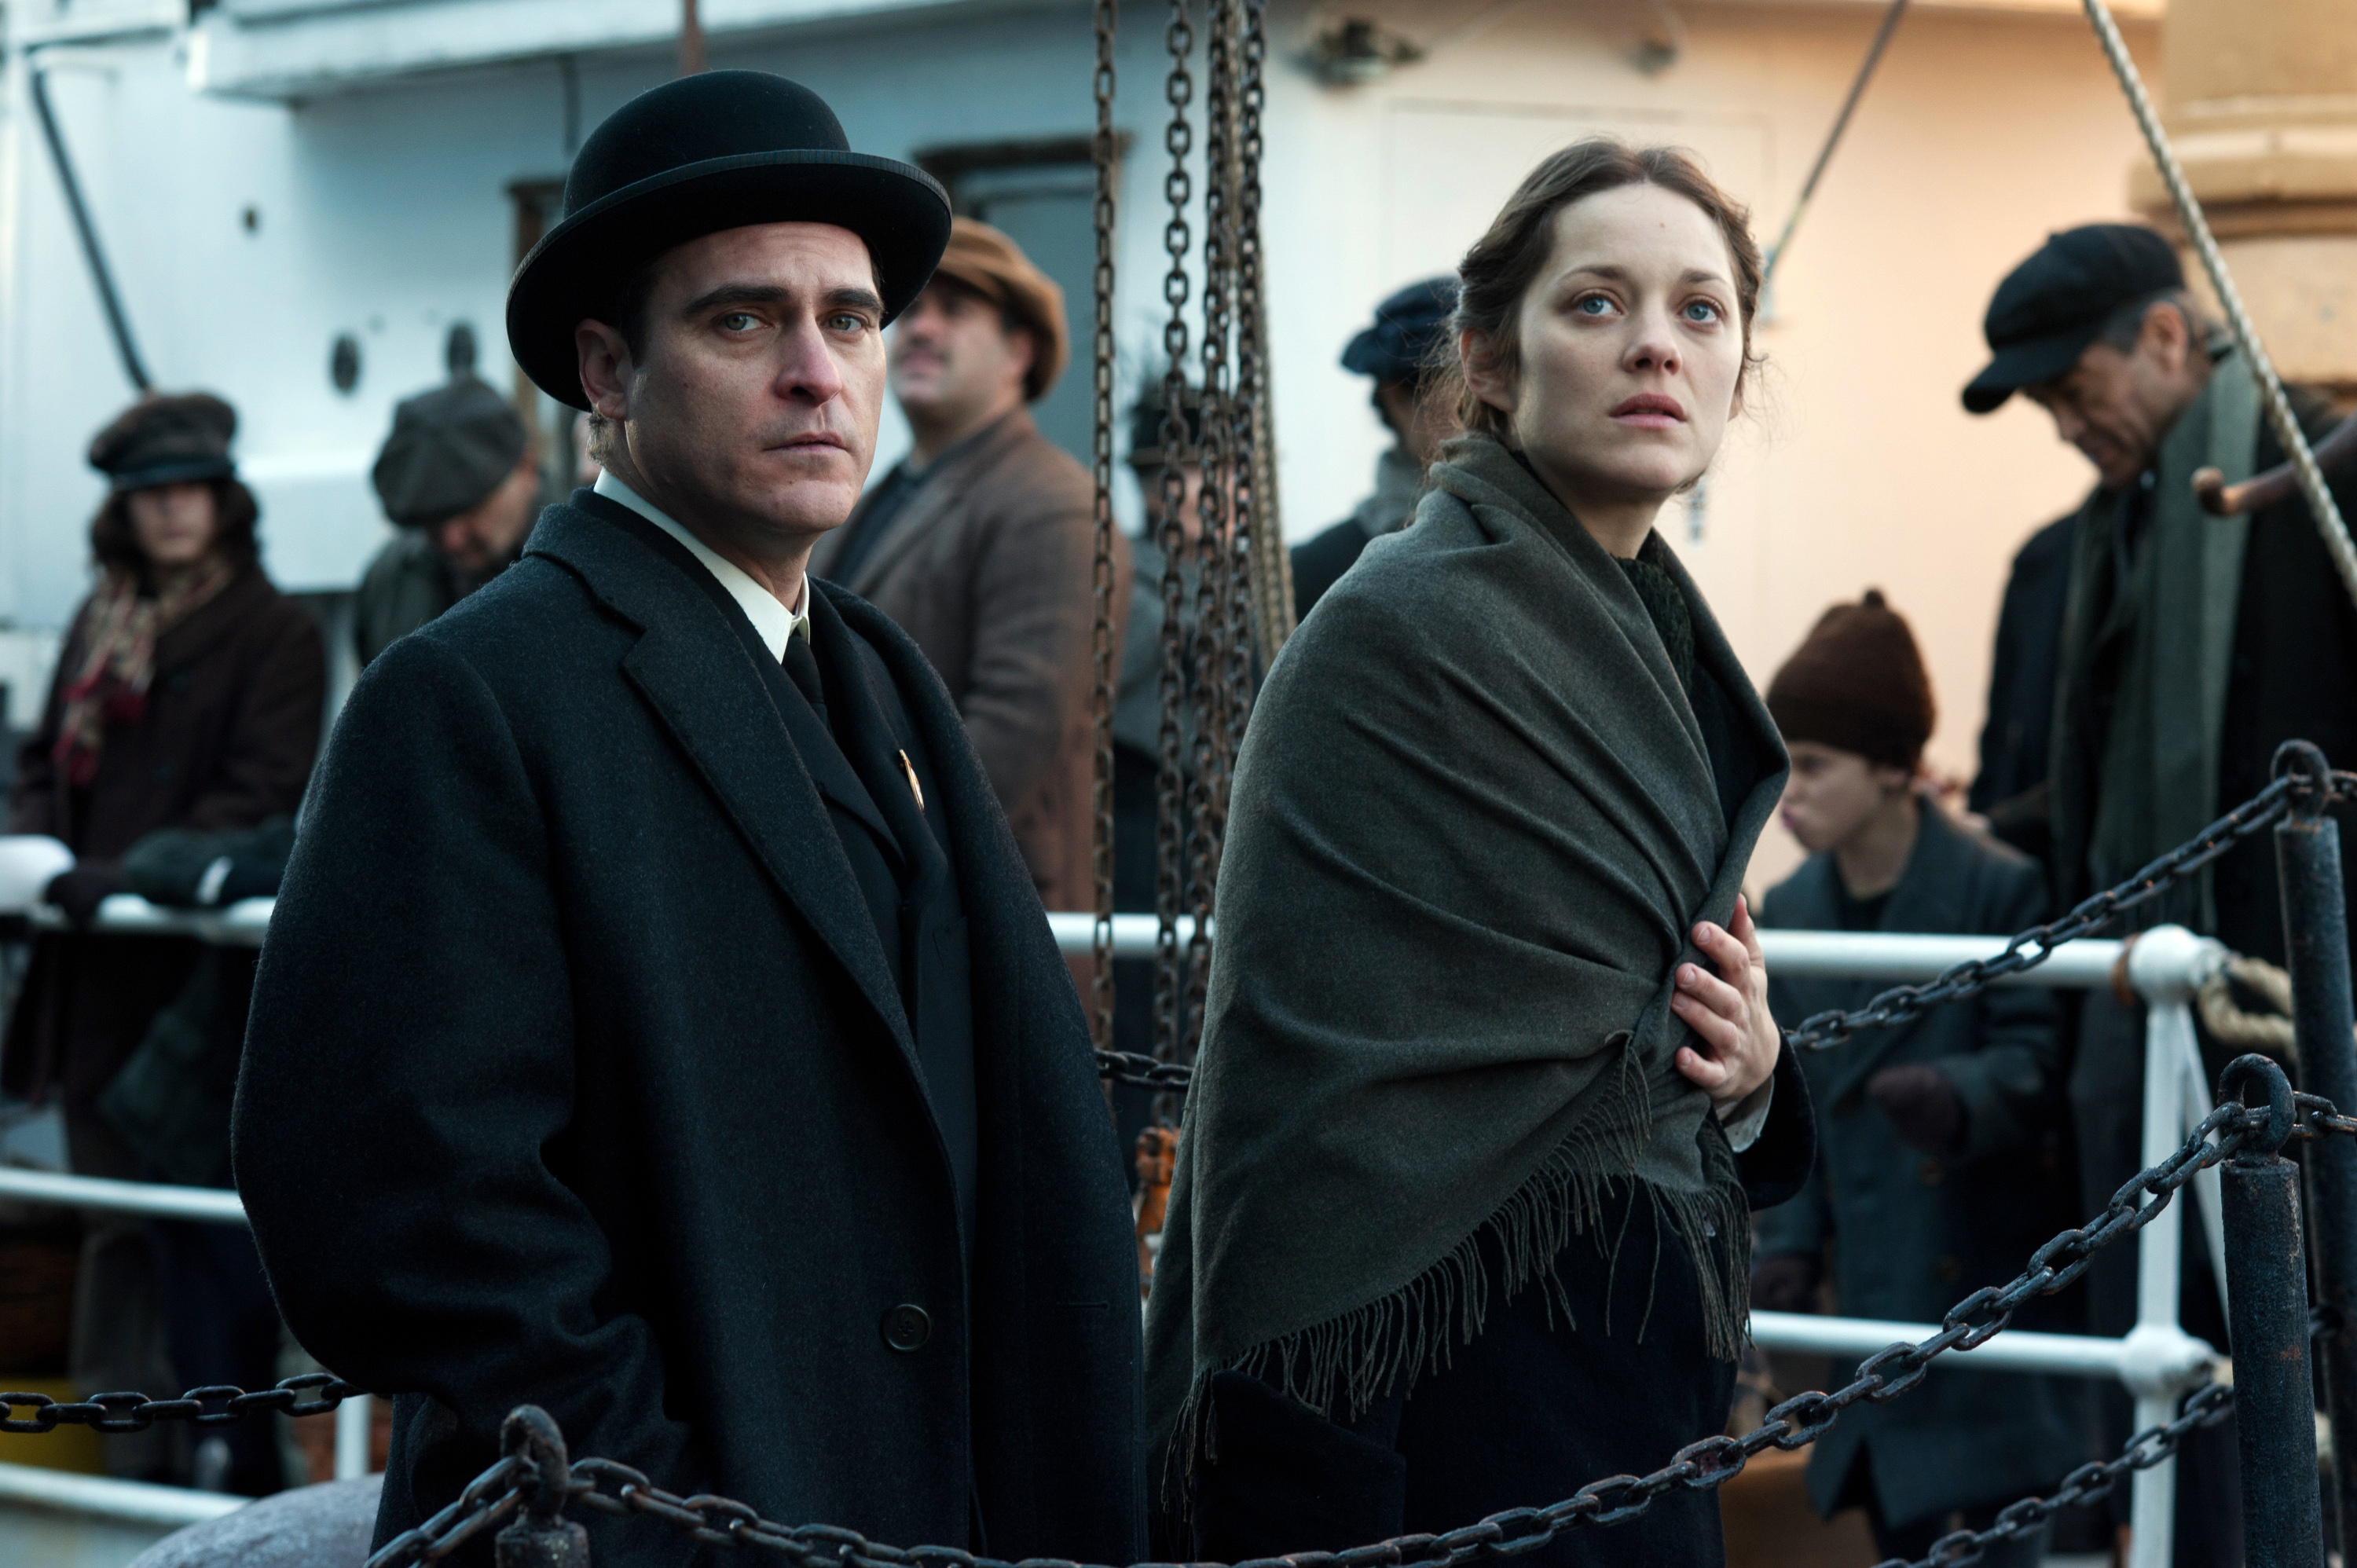 THE IMMIGRANT, from left: Joaquin Phoenix, Marion Cotillard, 2013. ph: Anne Joyce/©Weinstein Company/Courtesy Everett Collection